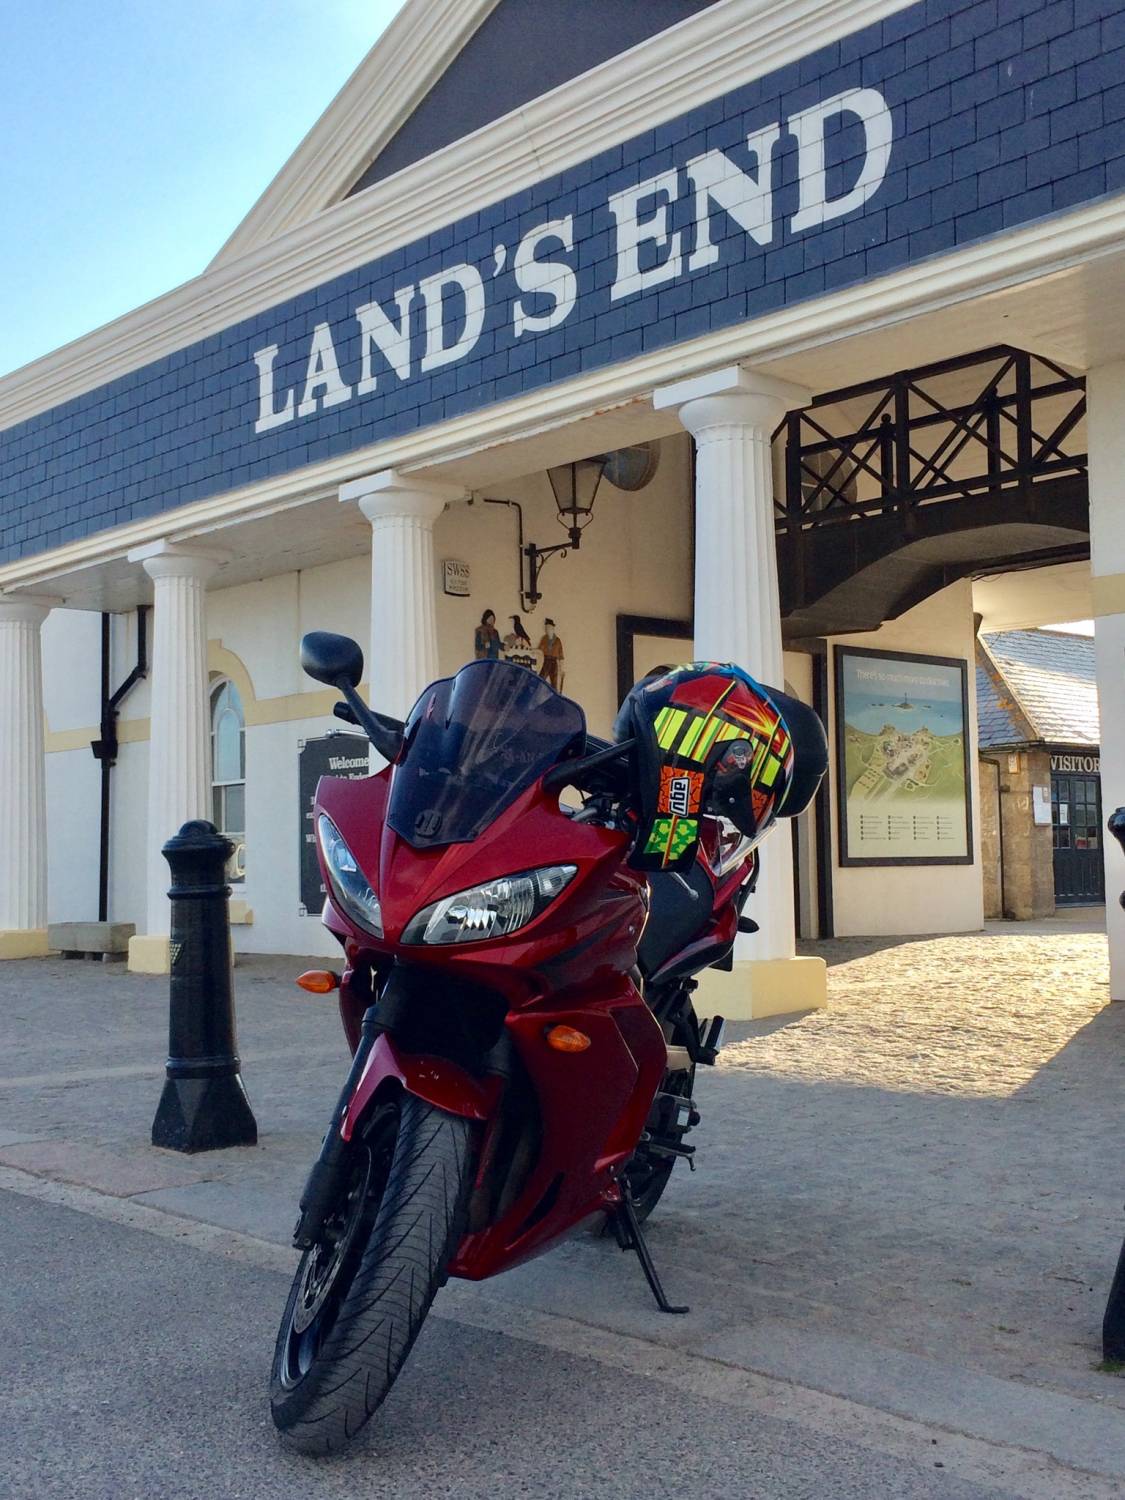 Finally Made It To Lands End, UK